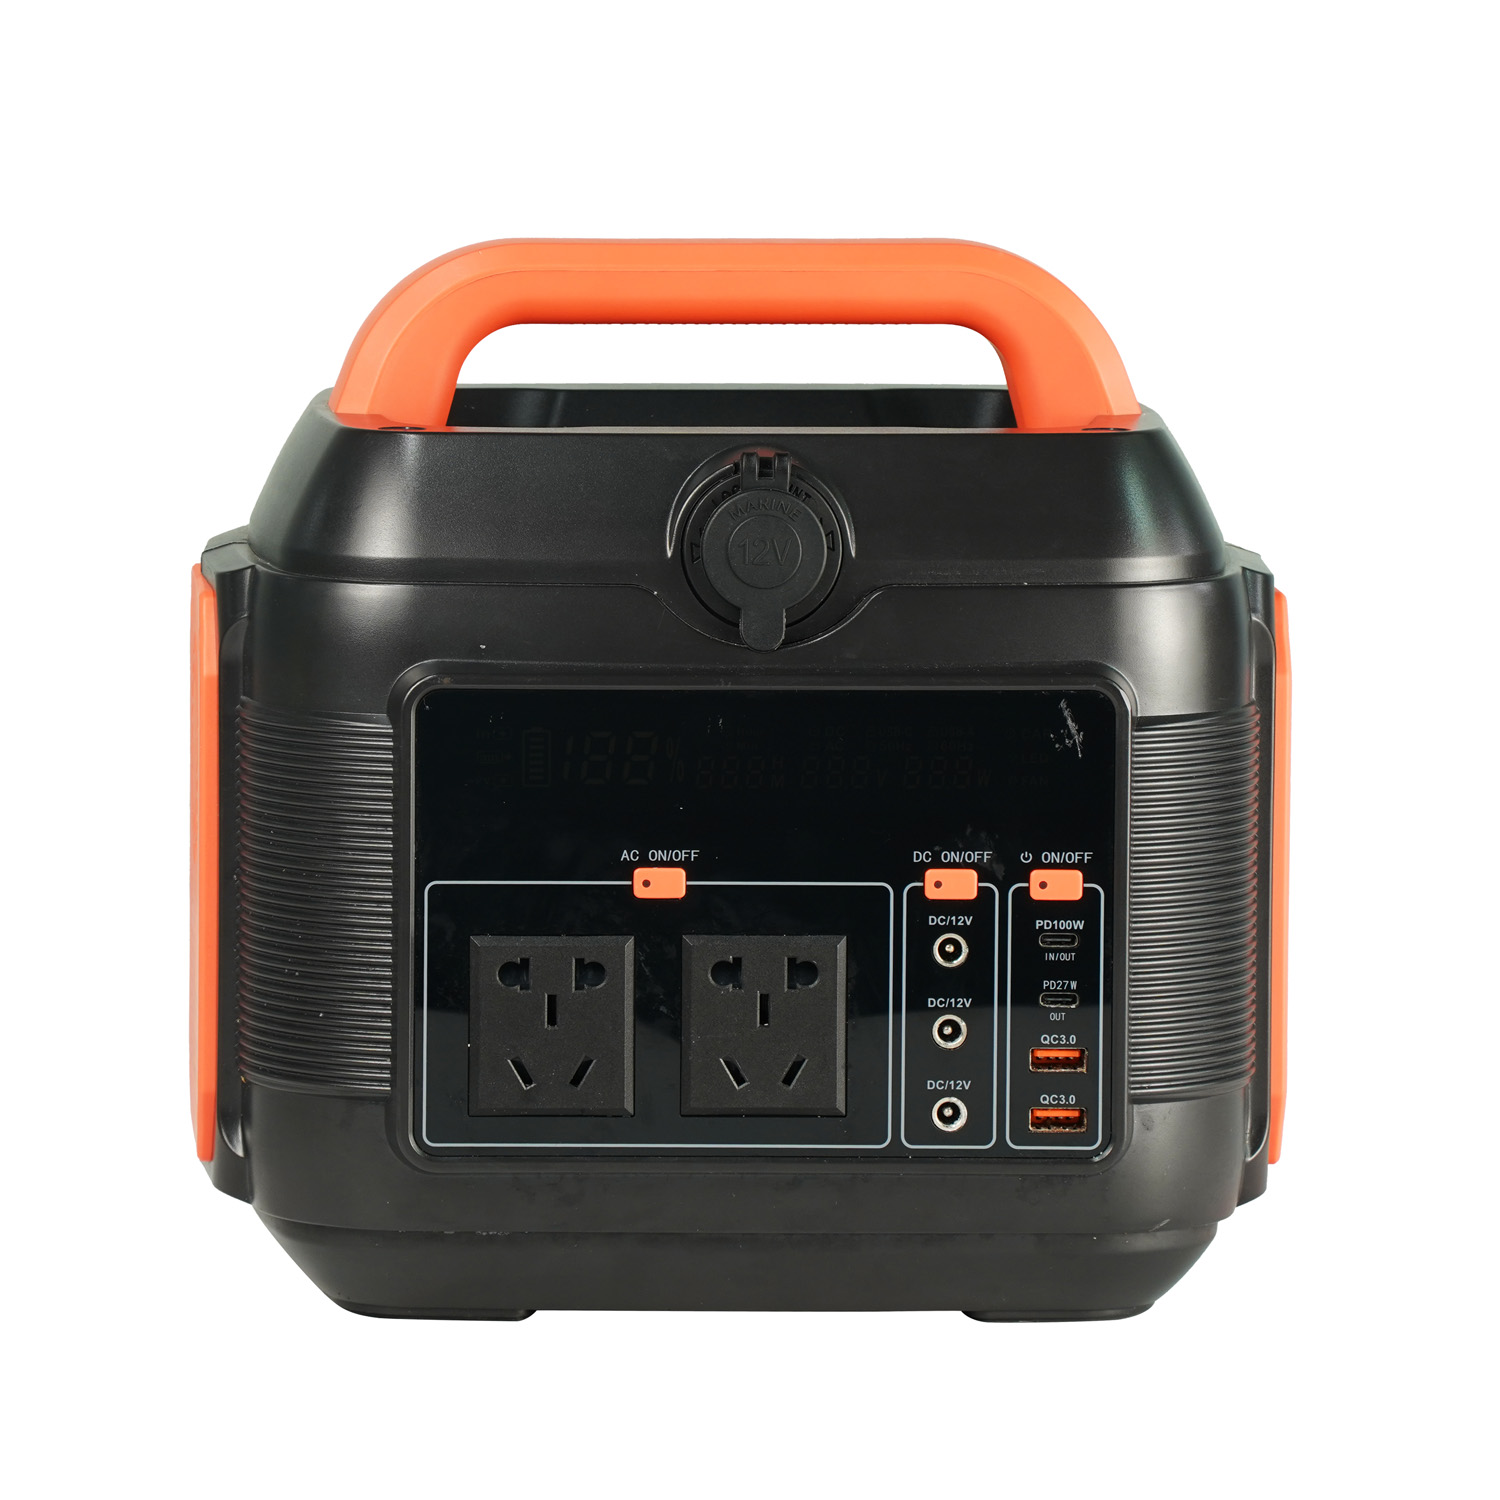 A&S Power Lithium Battery 600w Outdoor multi-function Solar Portable Power Station For Camping